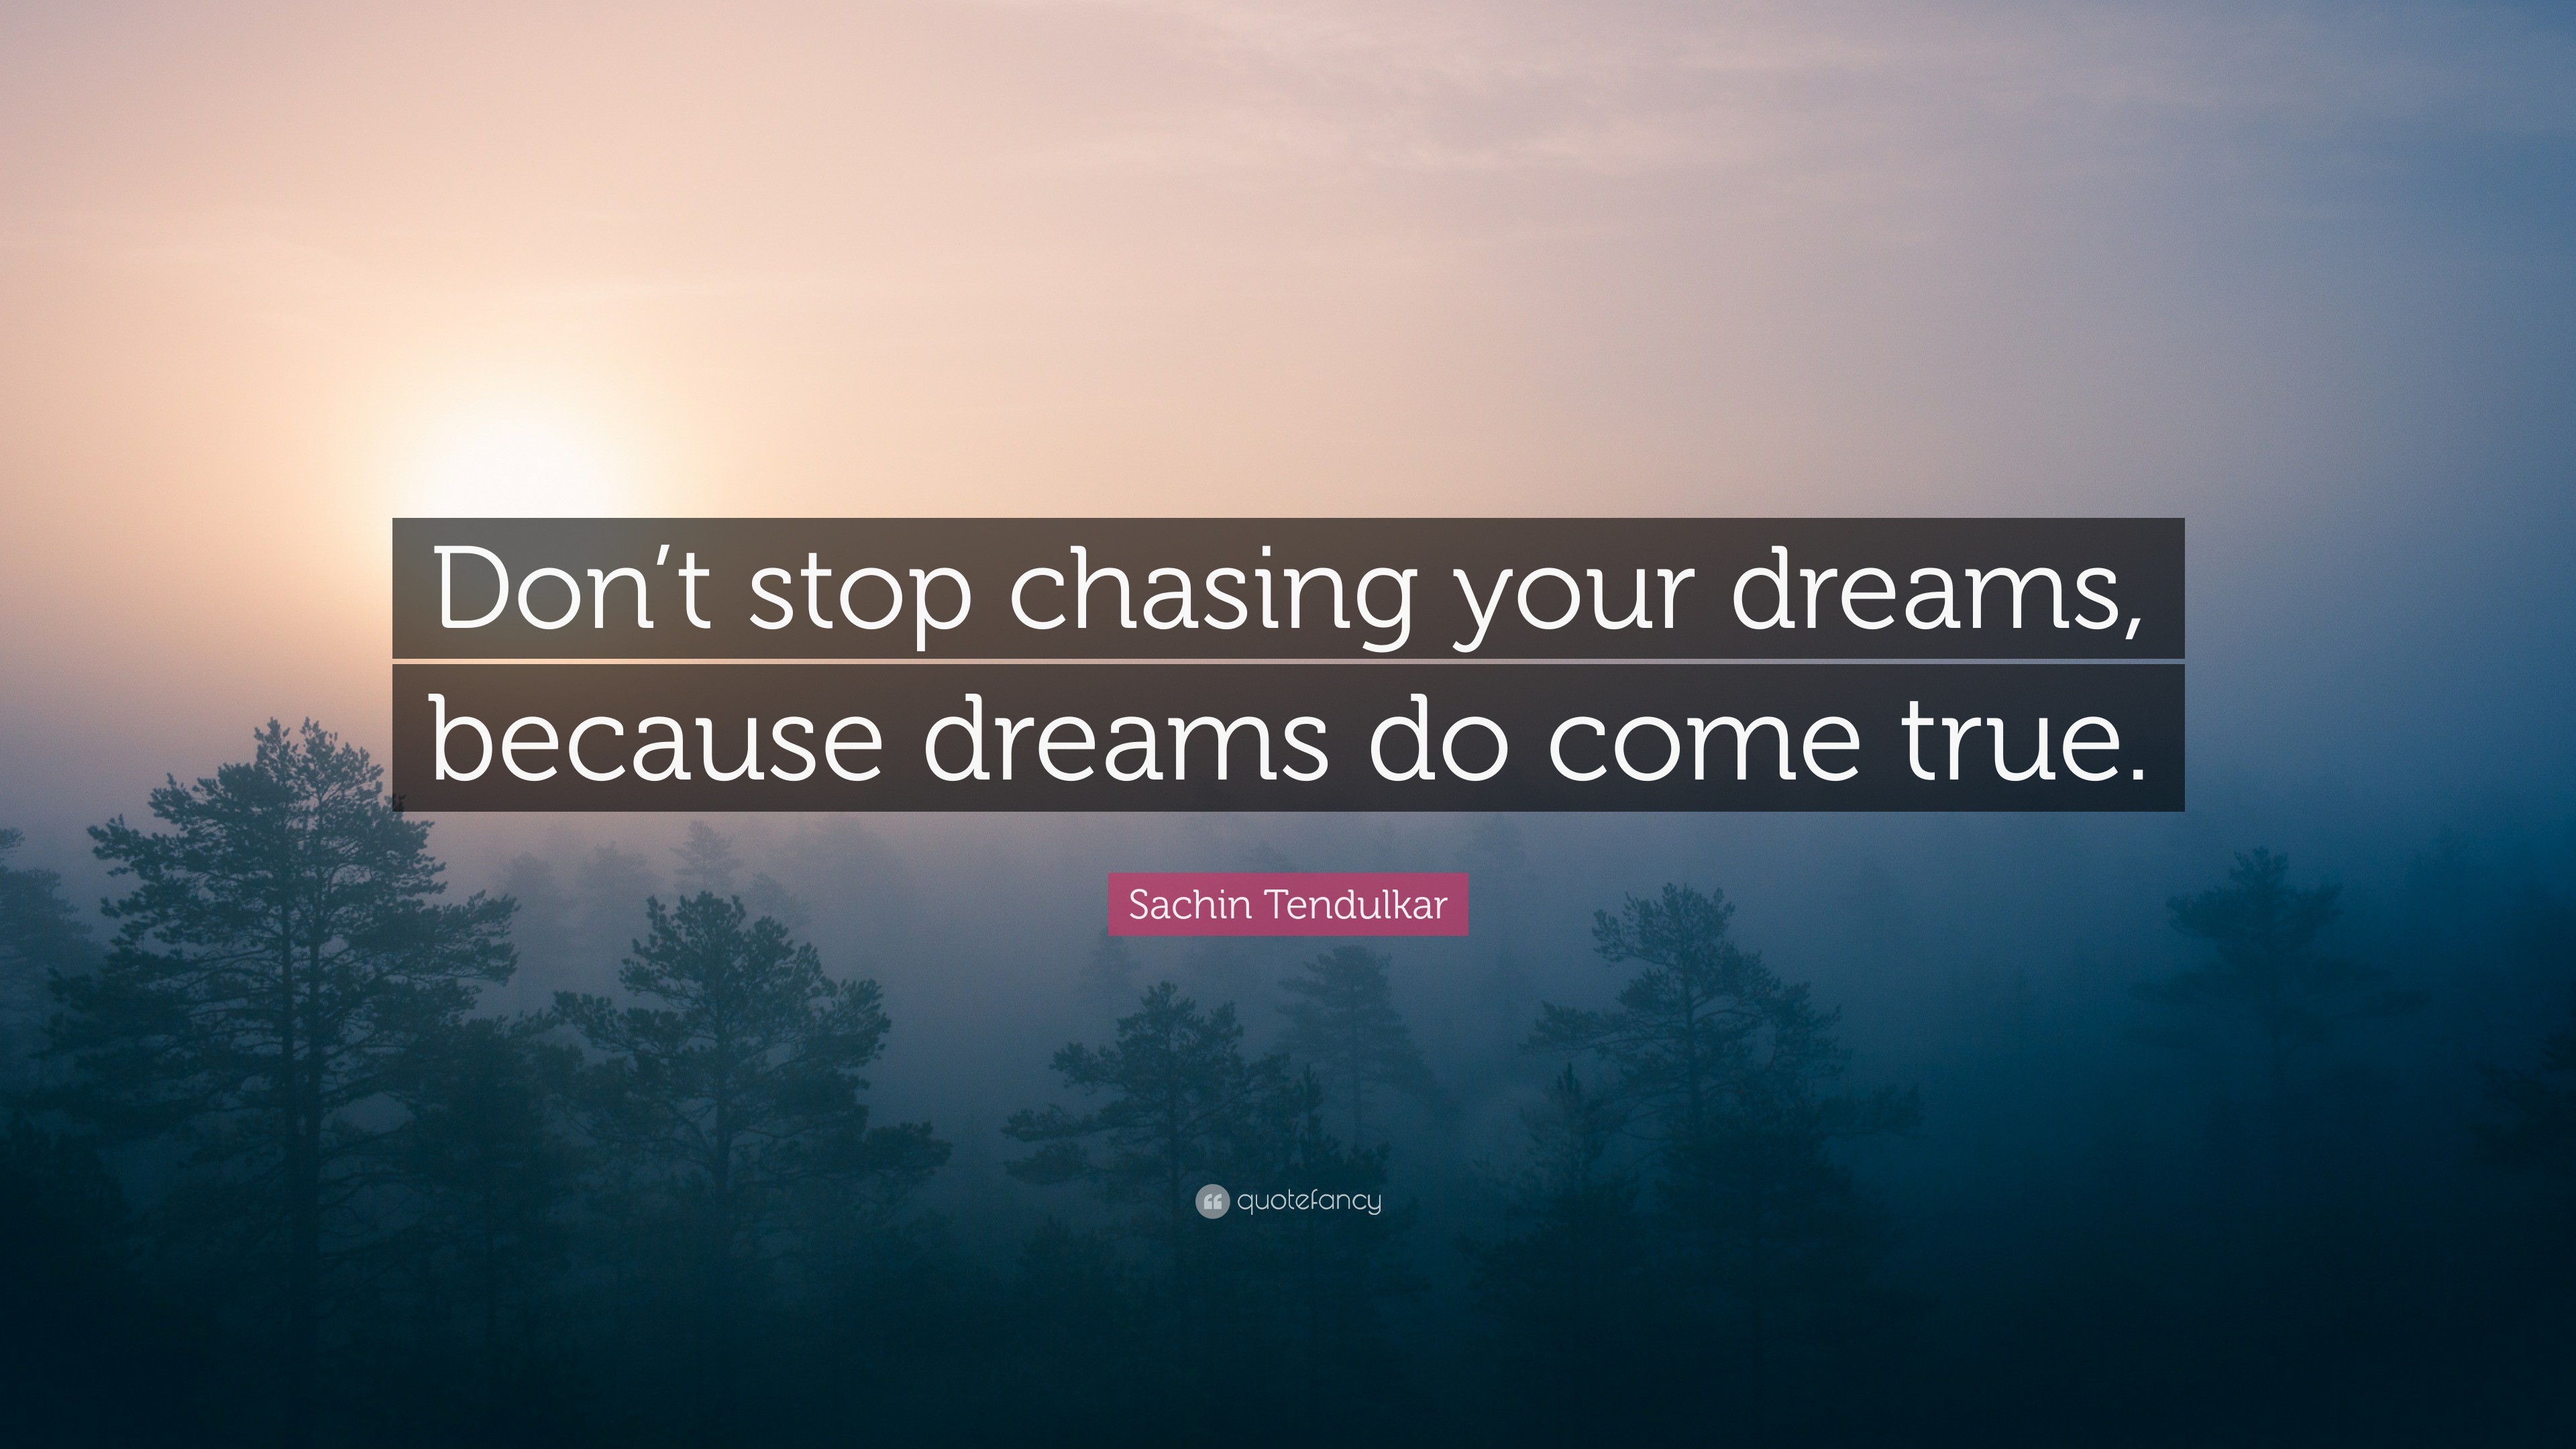 Sachin Tendulkar Quote: “Don’t stop chasing your dreams, because dreams